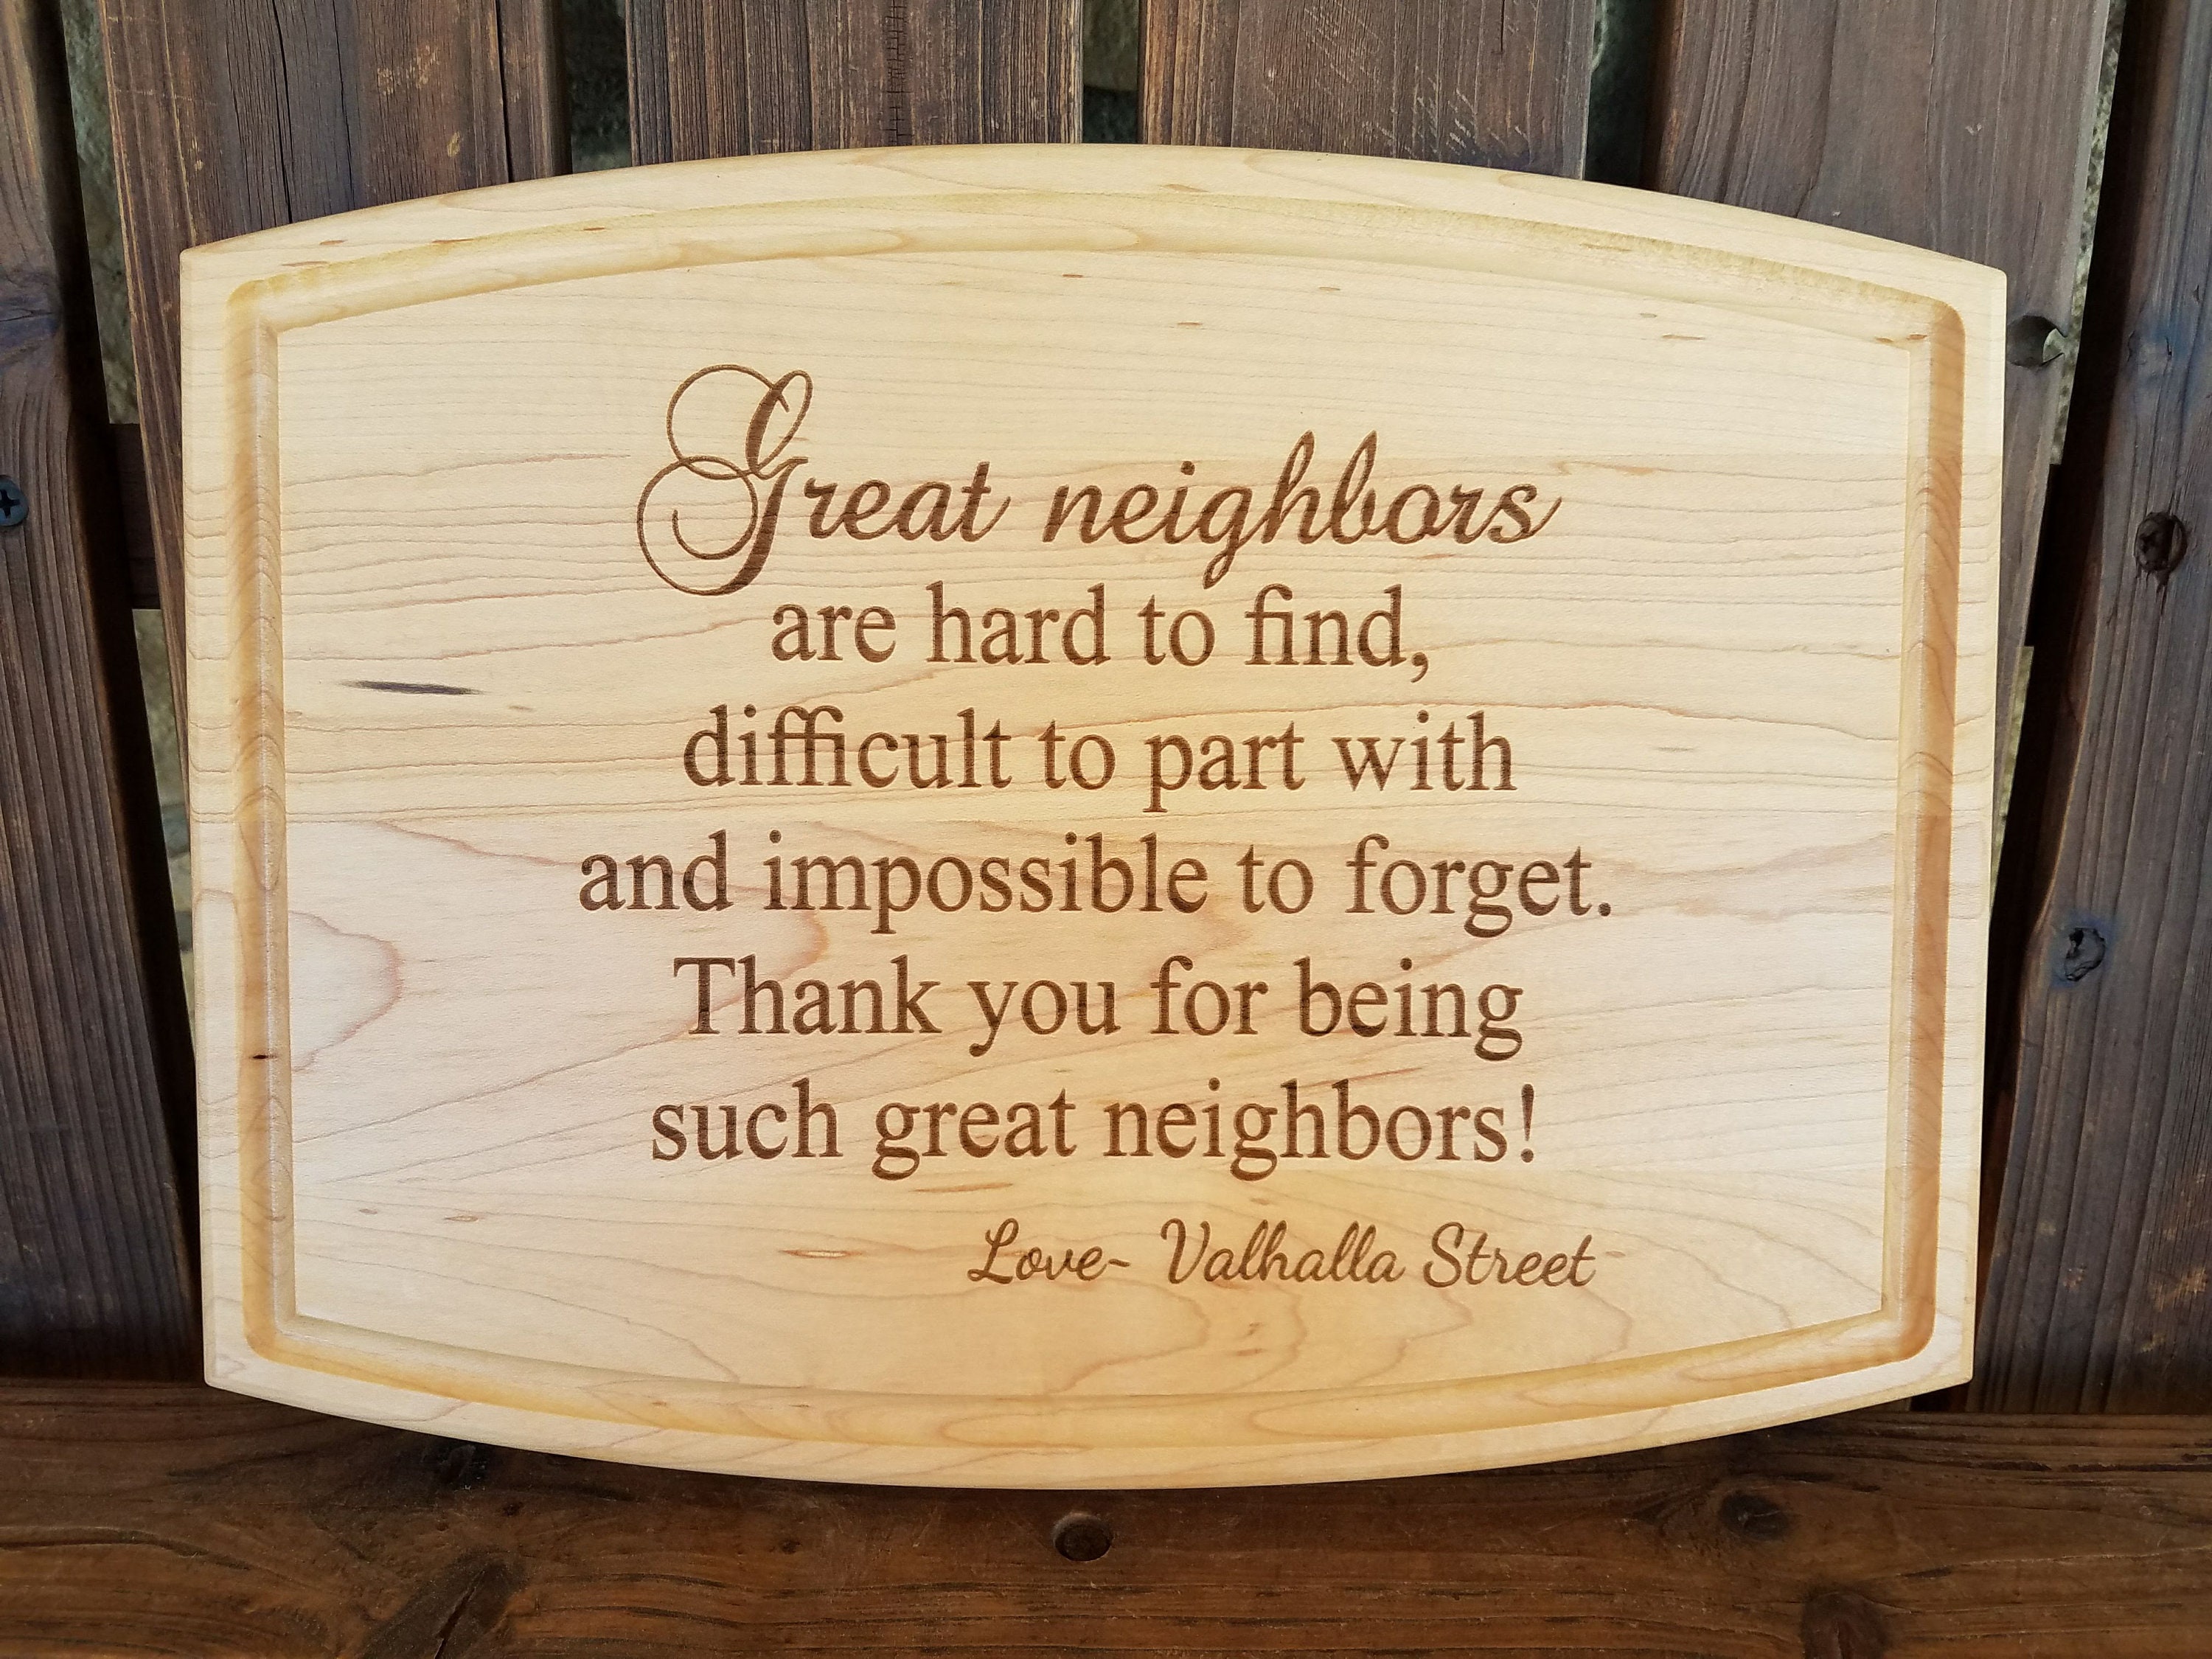 Neighbor Gift - A Good Neighbor Is A Welcome Blessing - Thank You for Being A Friend Best Neighbor Gifts